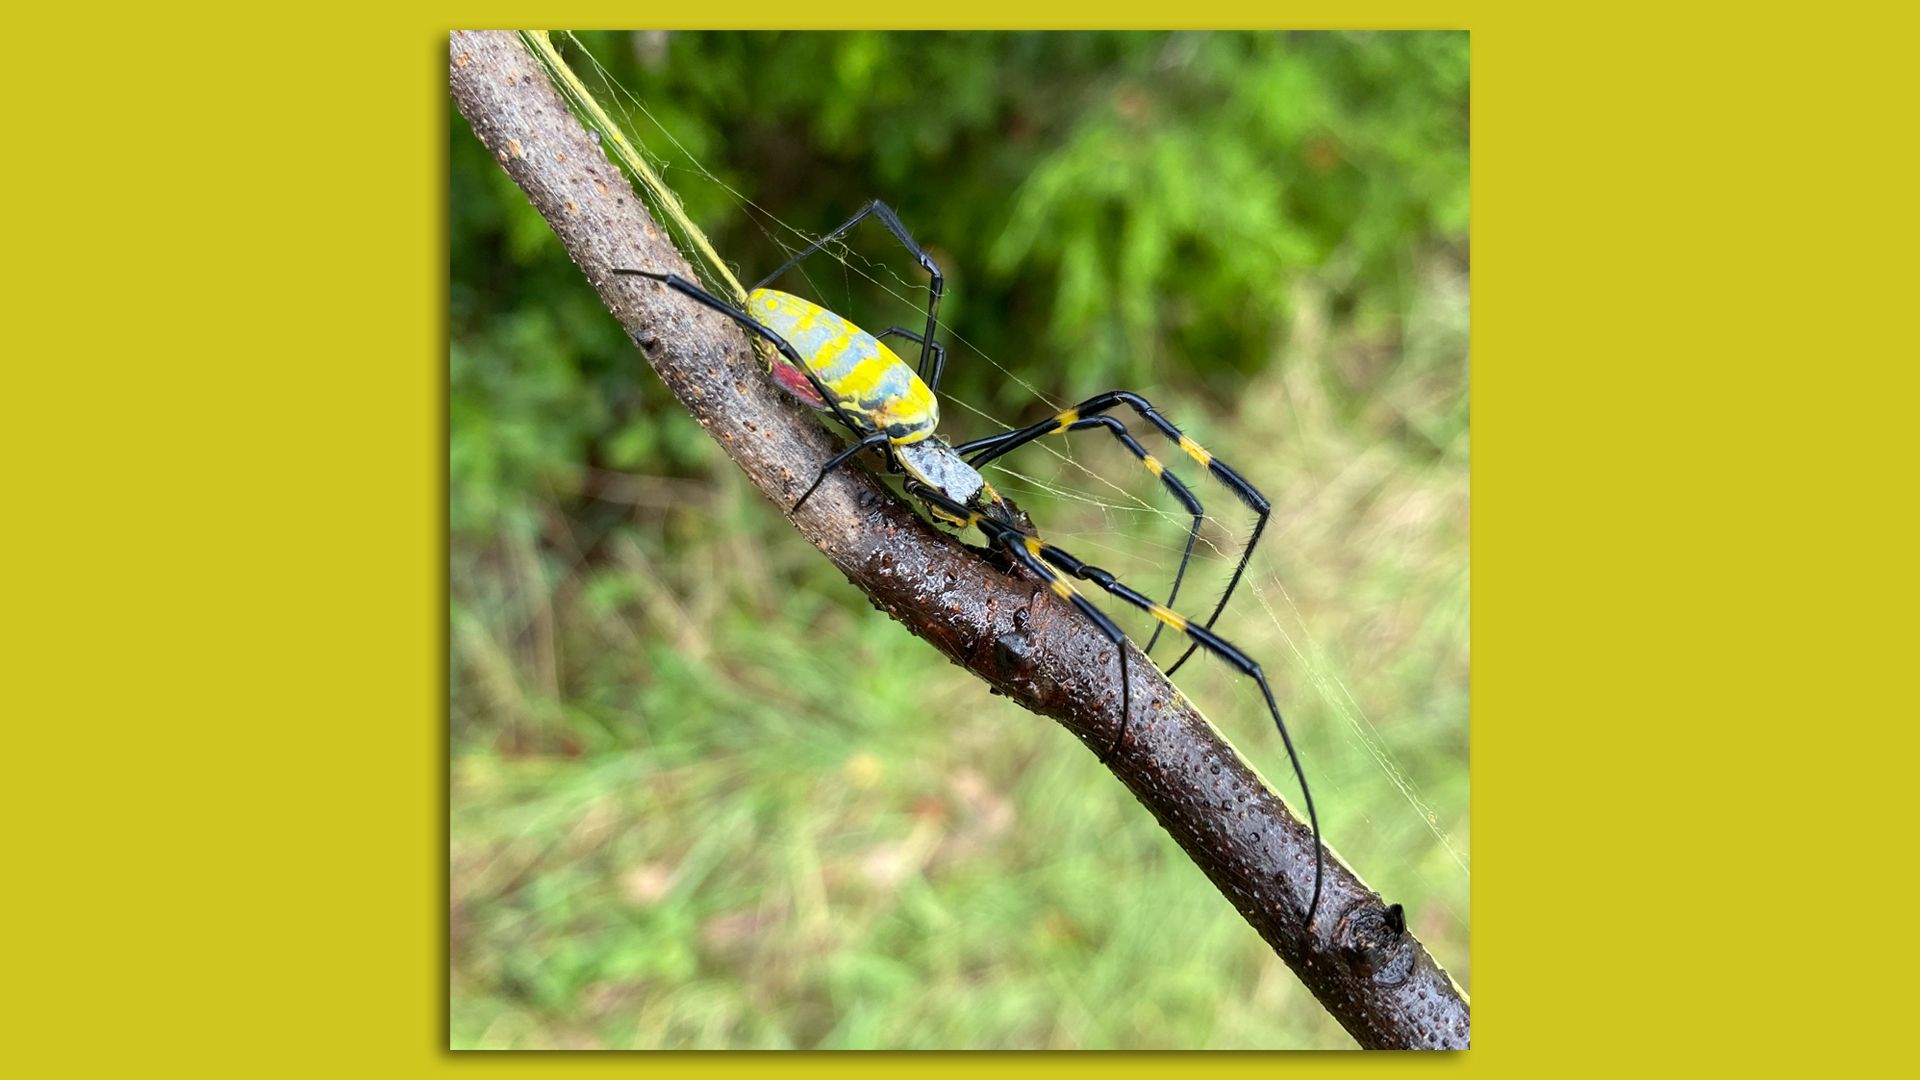 A creepy, large yellow and black spider with a bulbous, bright yellow body is crawling along a tree branch.